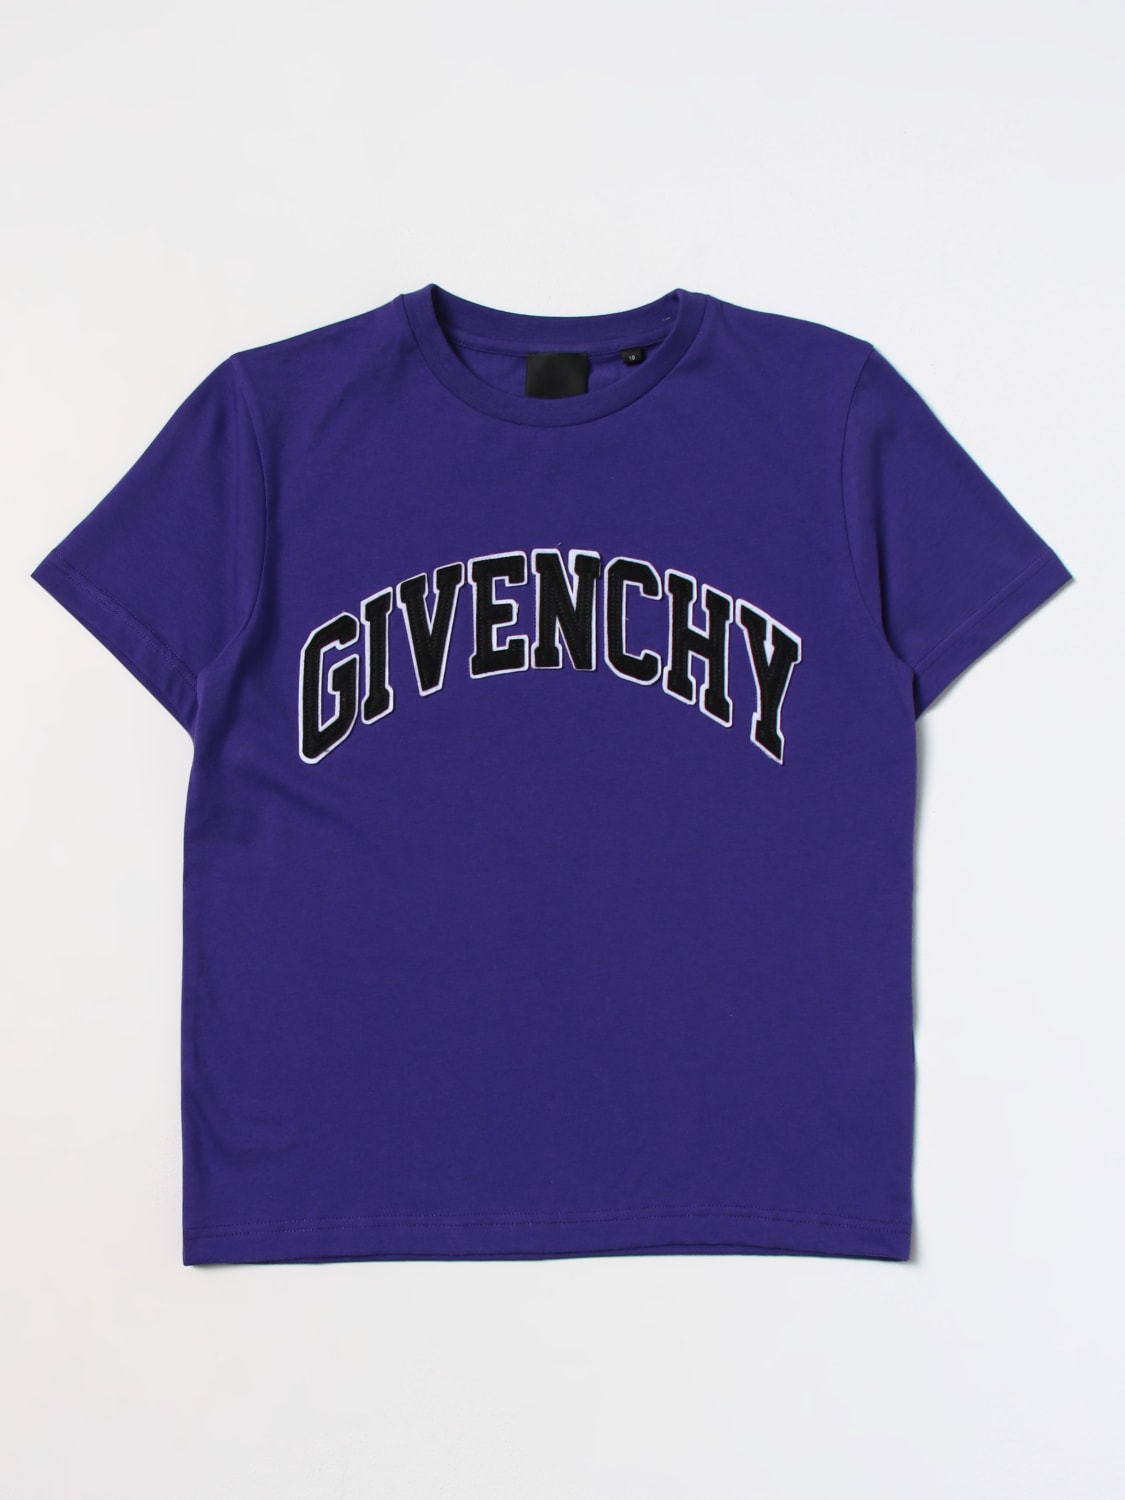 Givenchy ロゴTシャツ イエロー